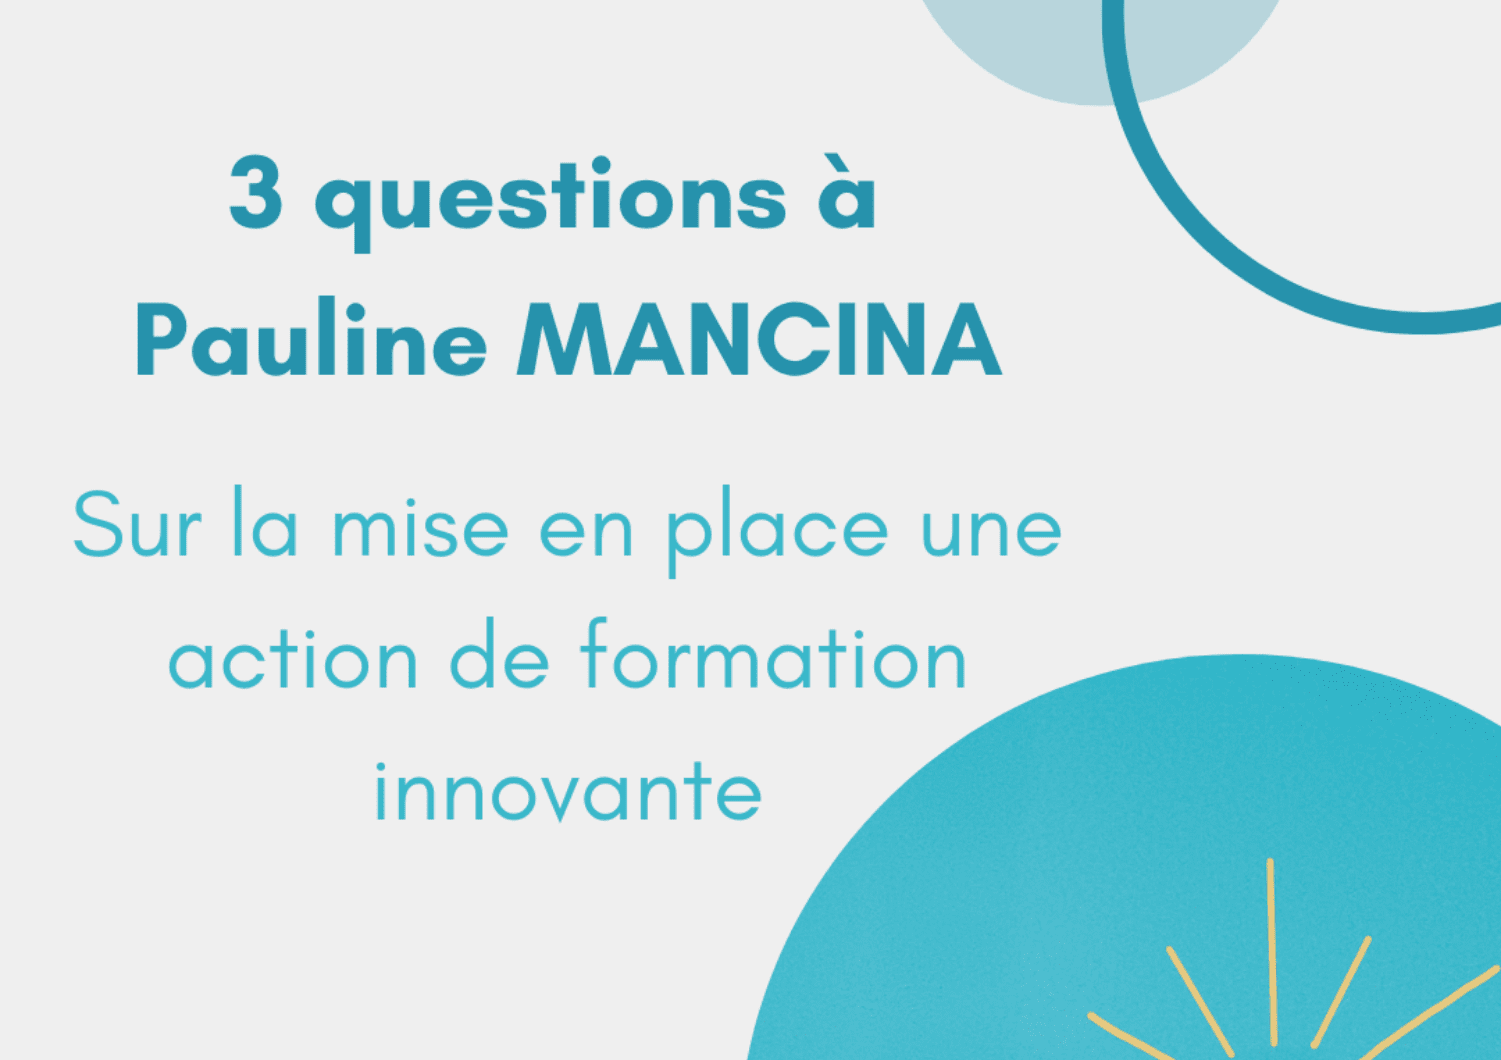 question-interview-pauline-mancina-formation-innovante.png